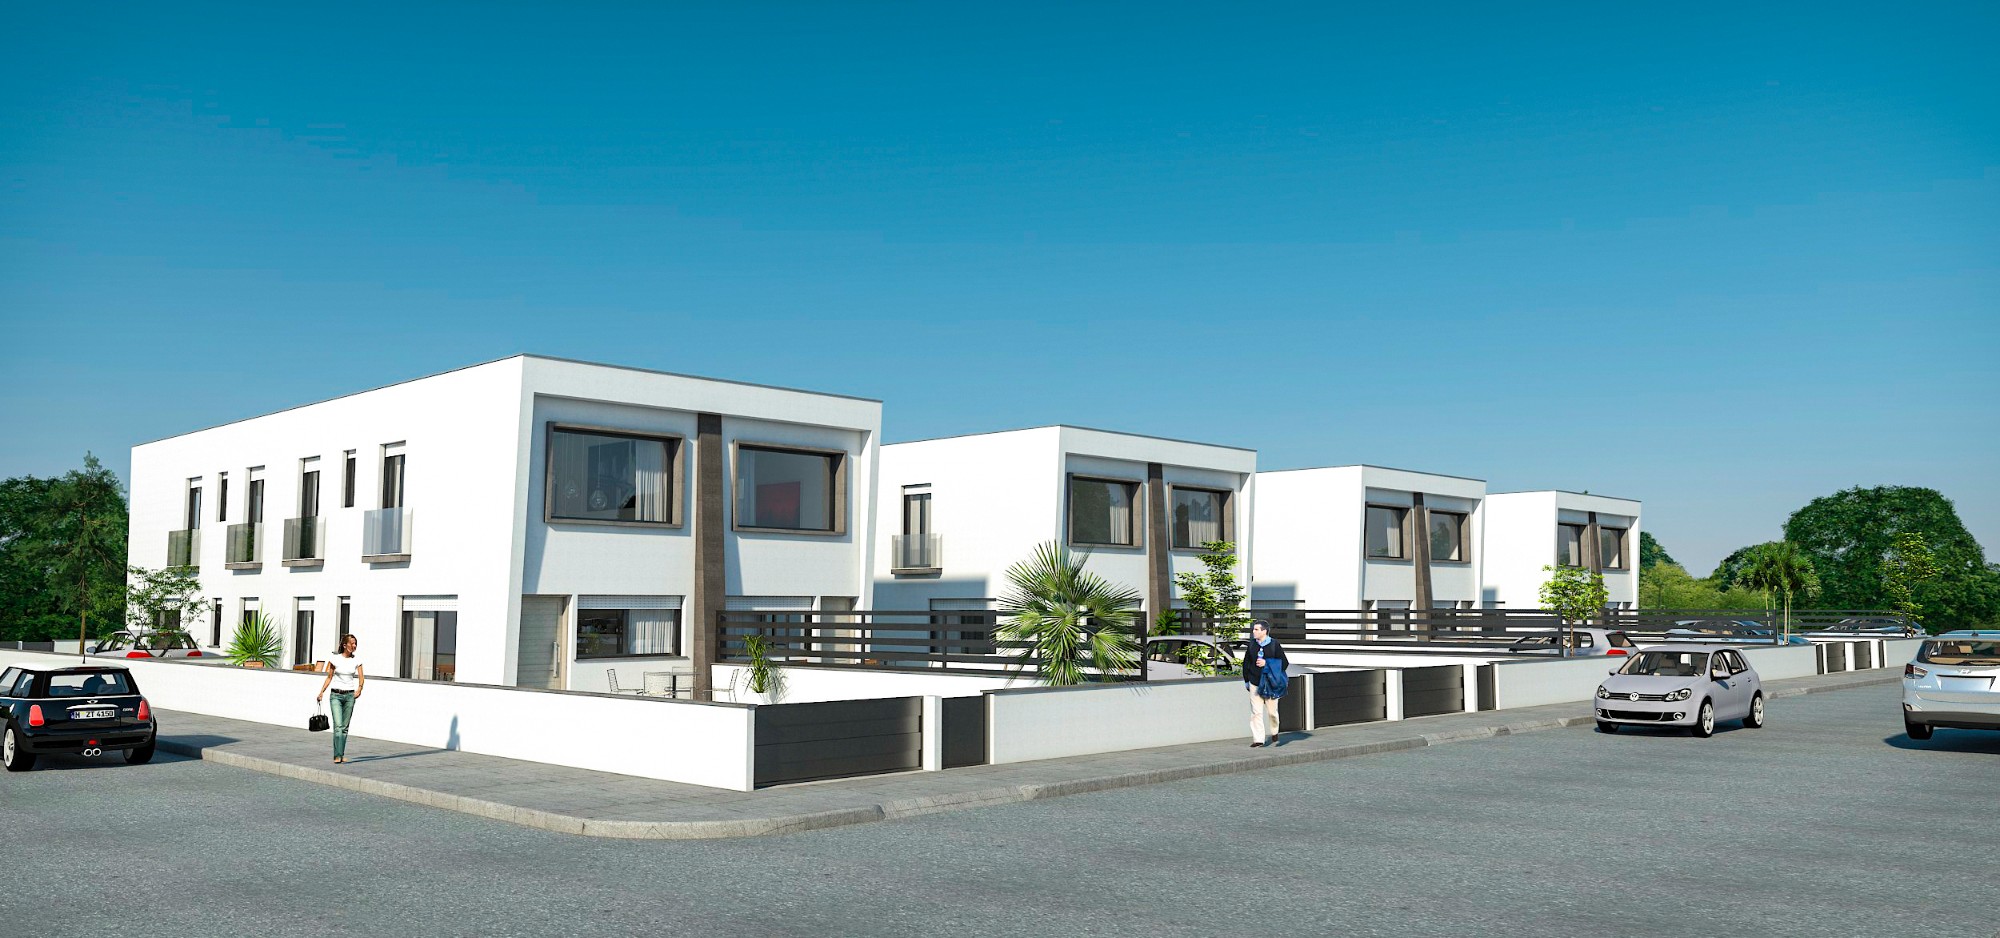 Property Image 619268-gran-alacant-townhouses-1-2